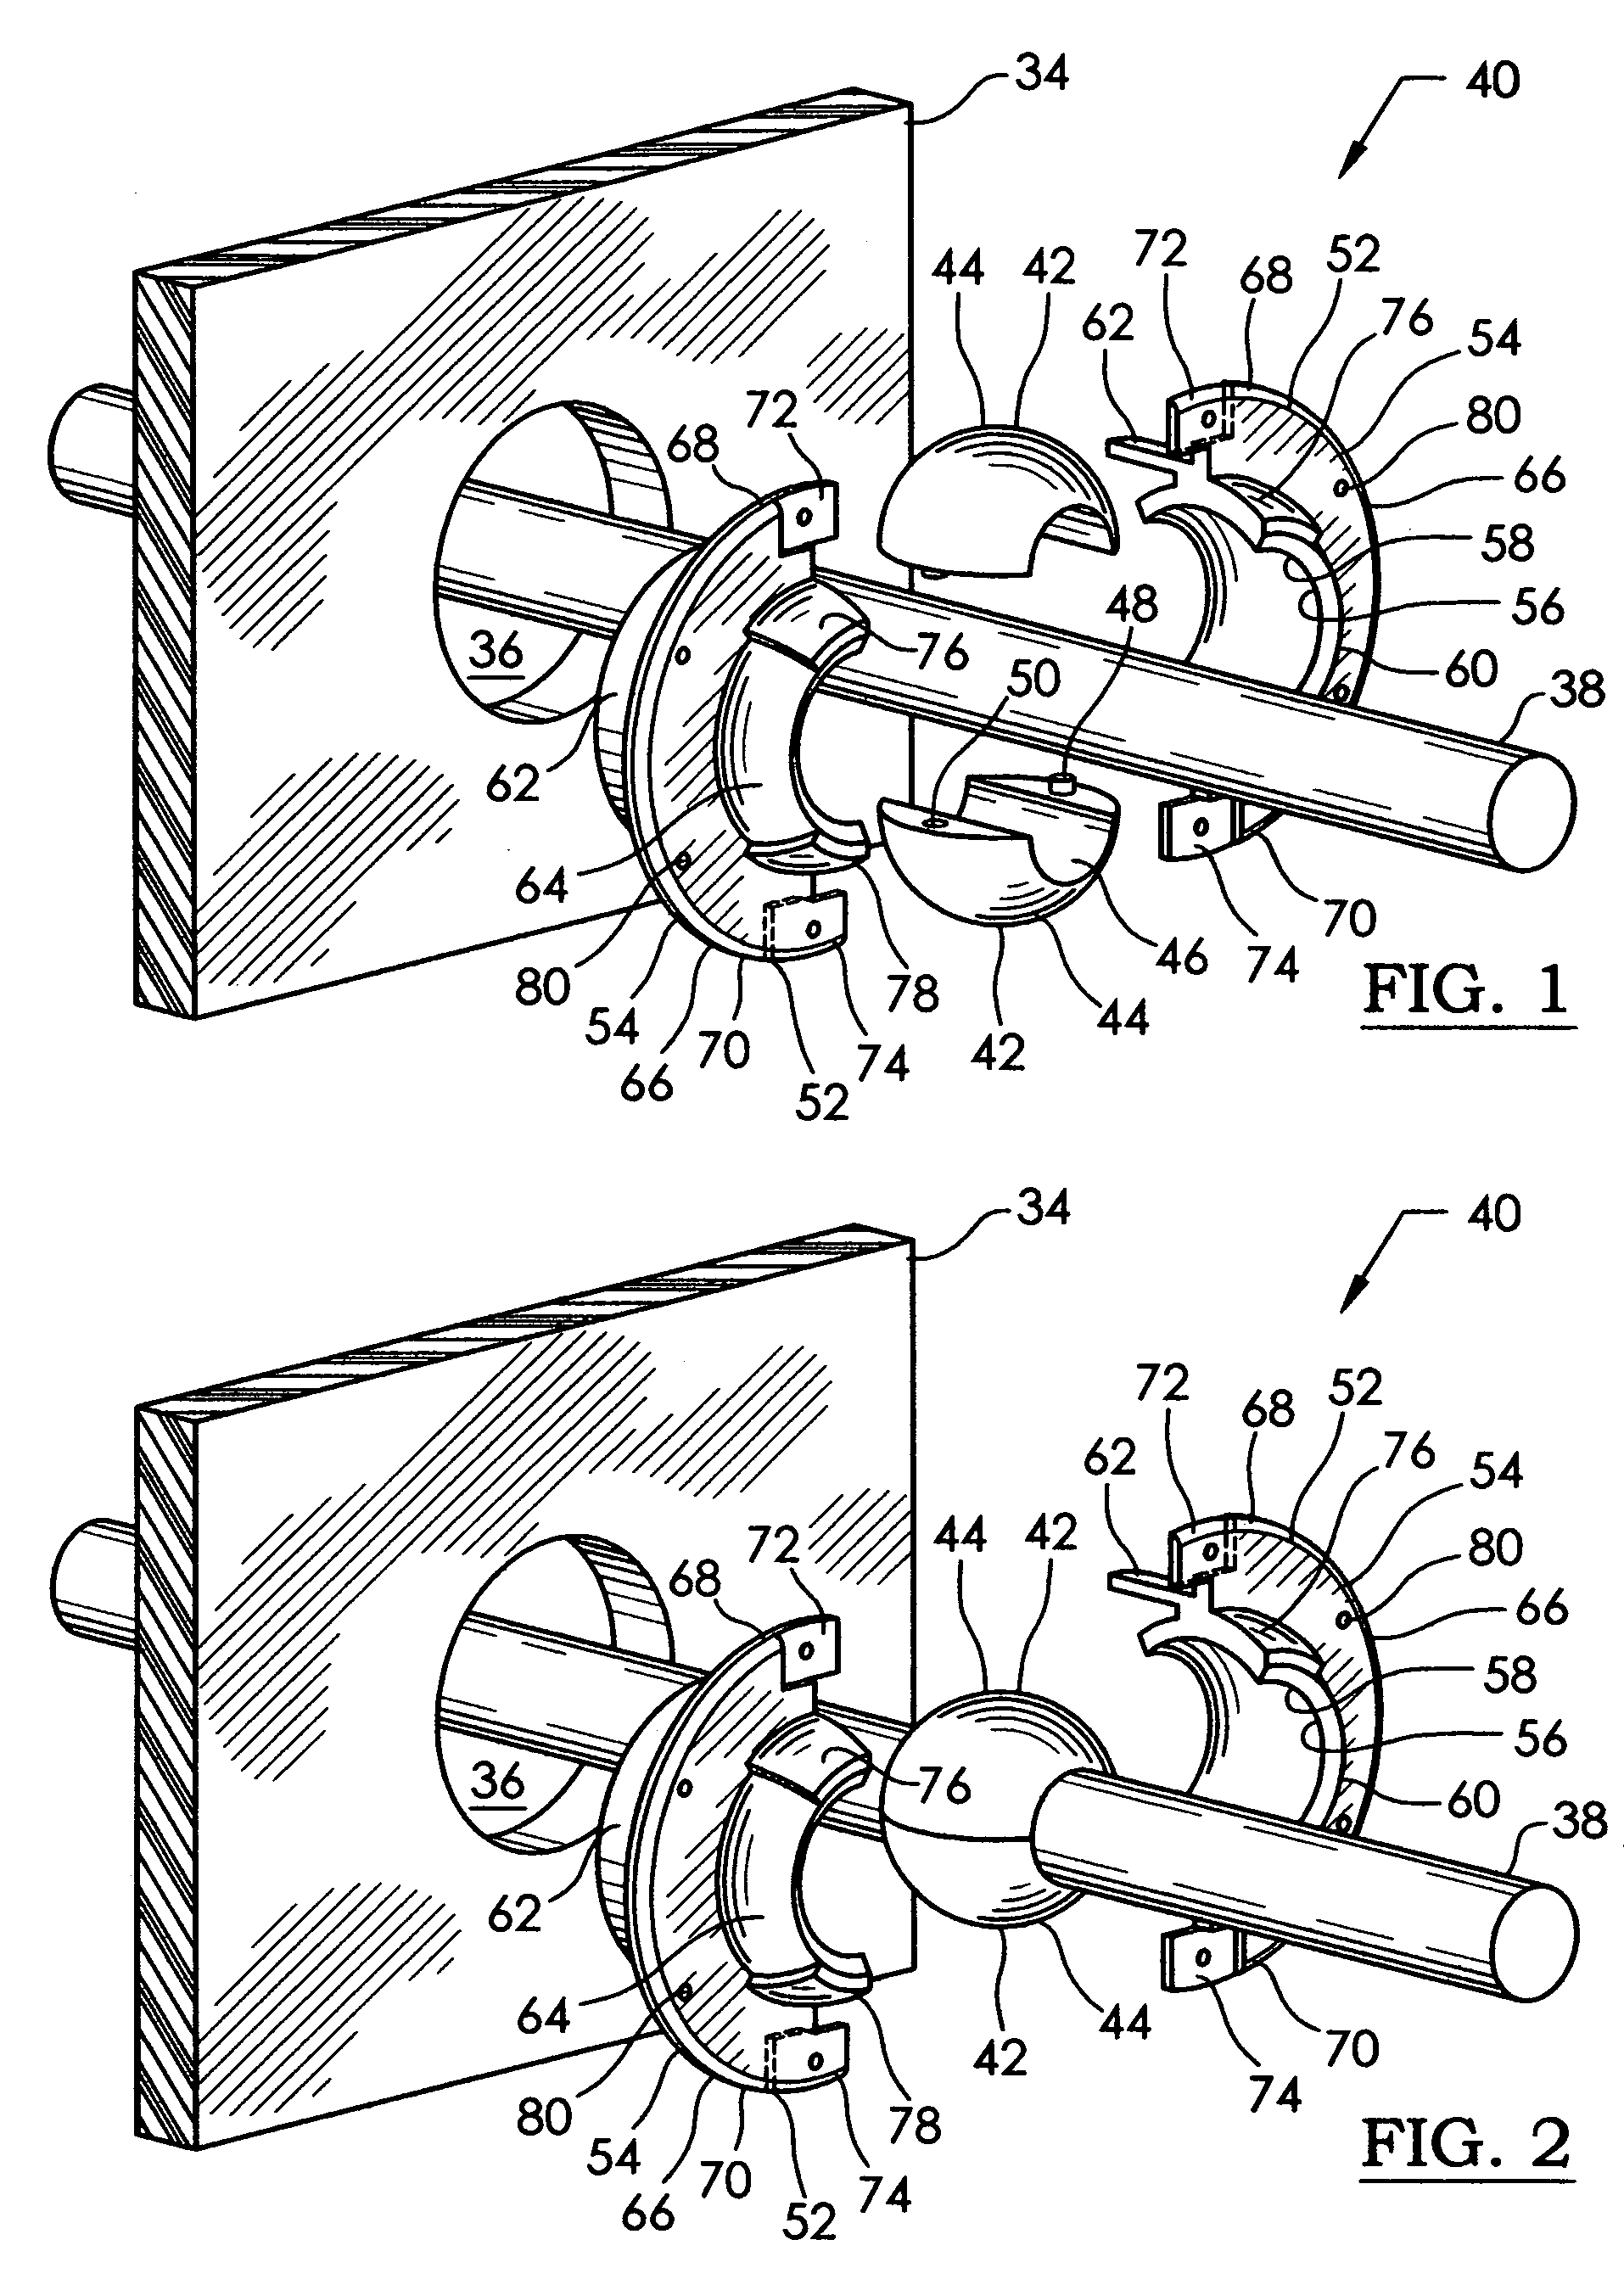 Cable grommet with ball and socket